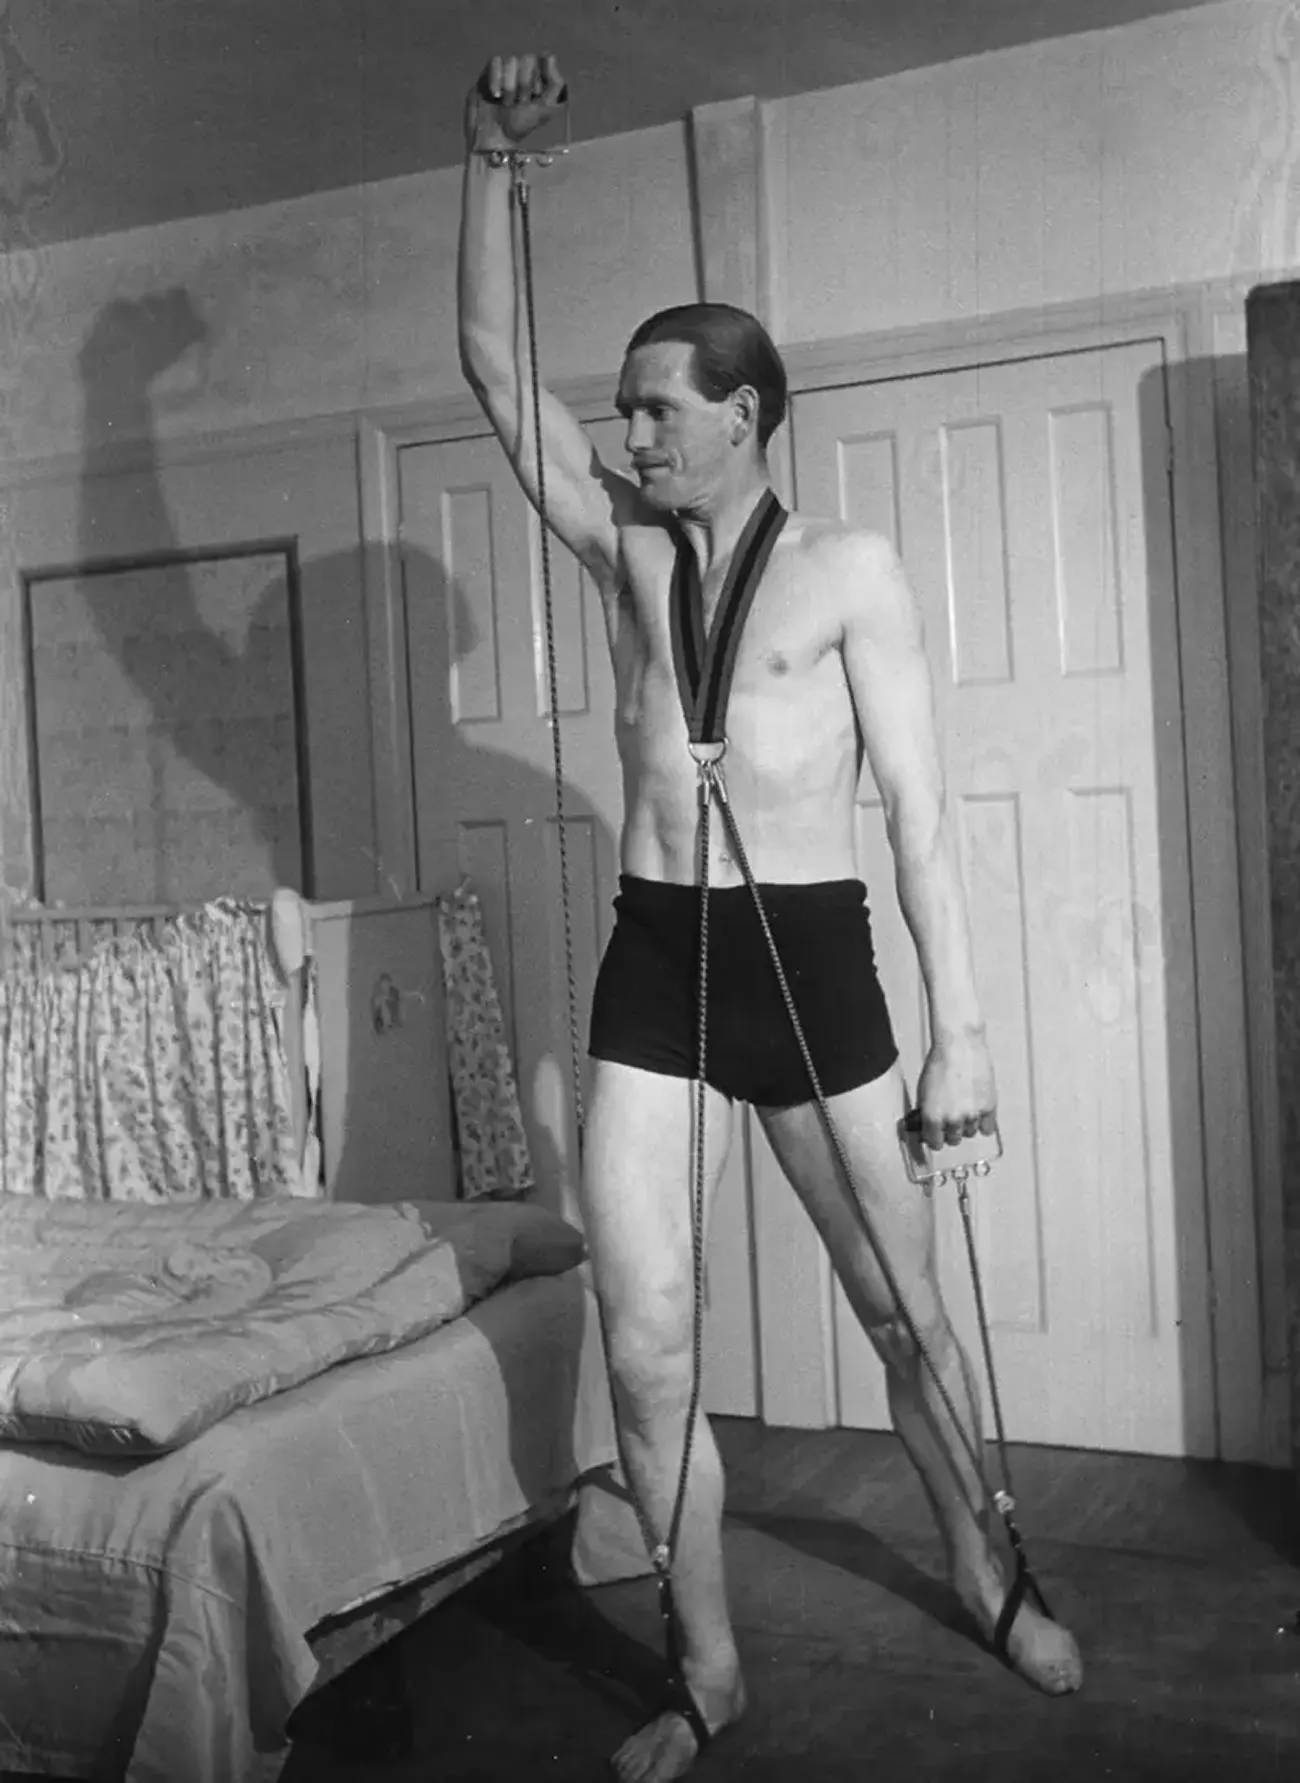 Exercise device in 1950.